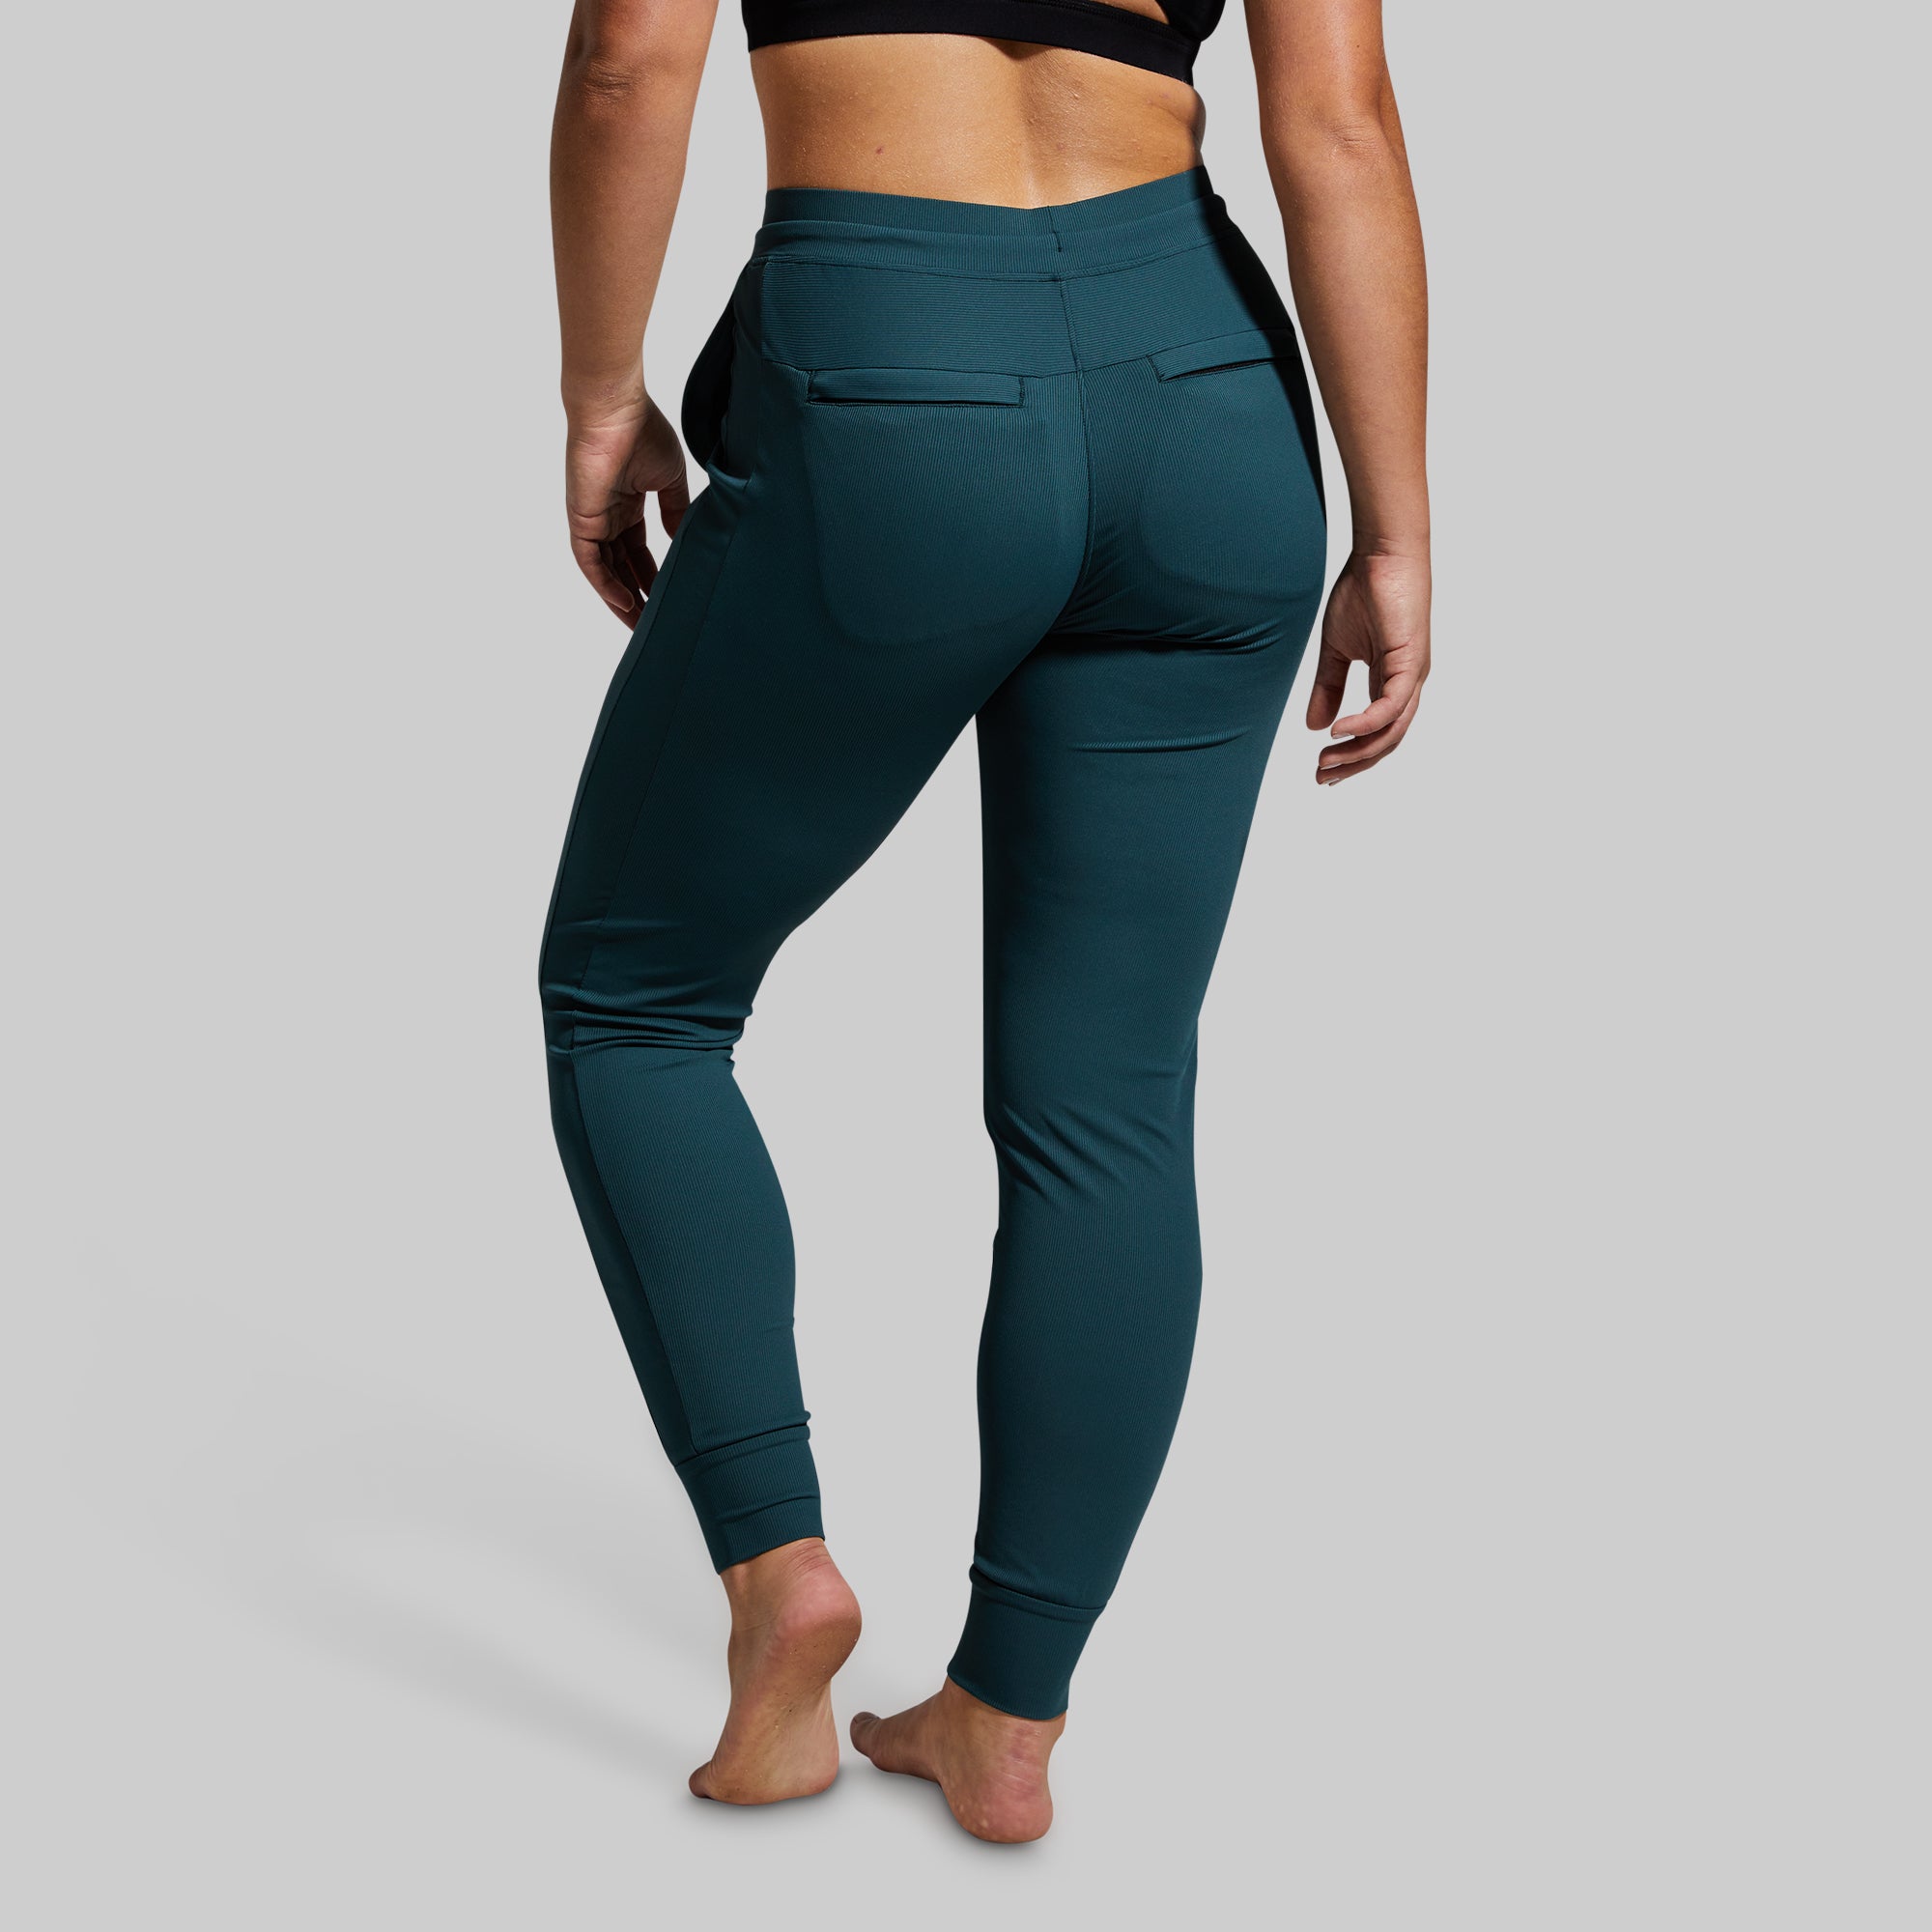 Aligns 23” vs 25” vs 28” if out of your normal size/inseam : r/lululemon